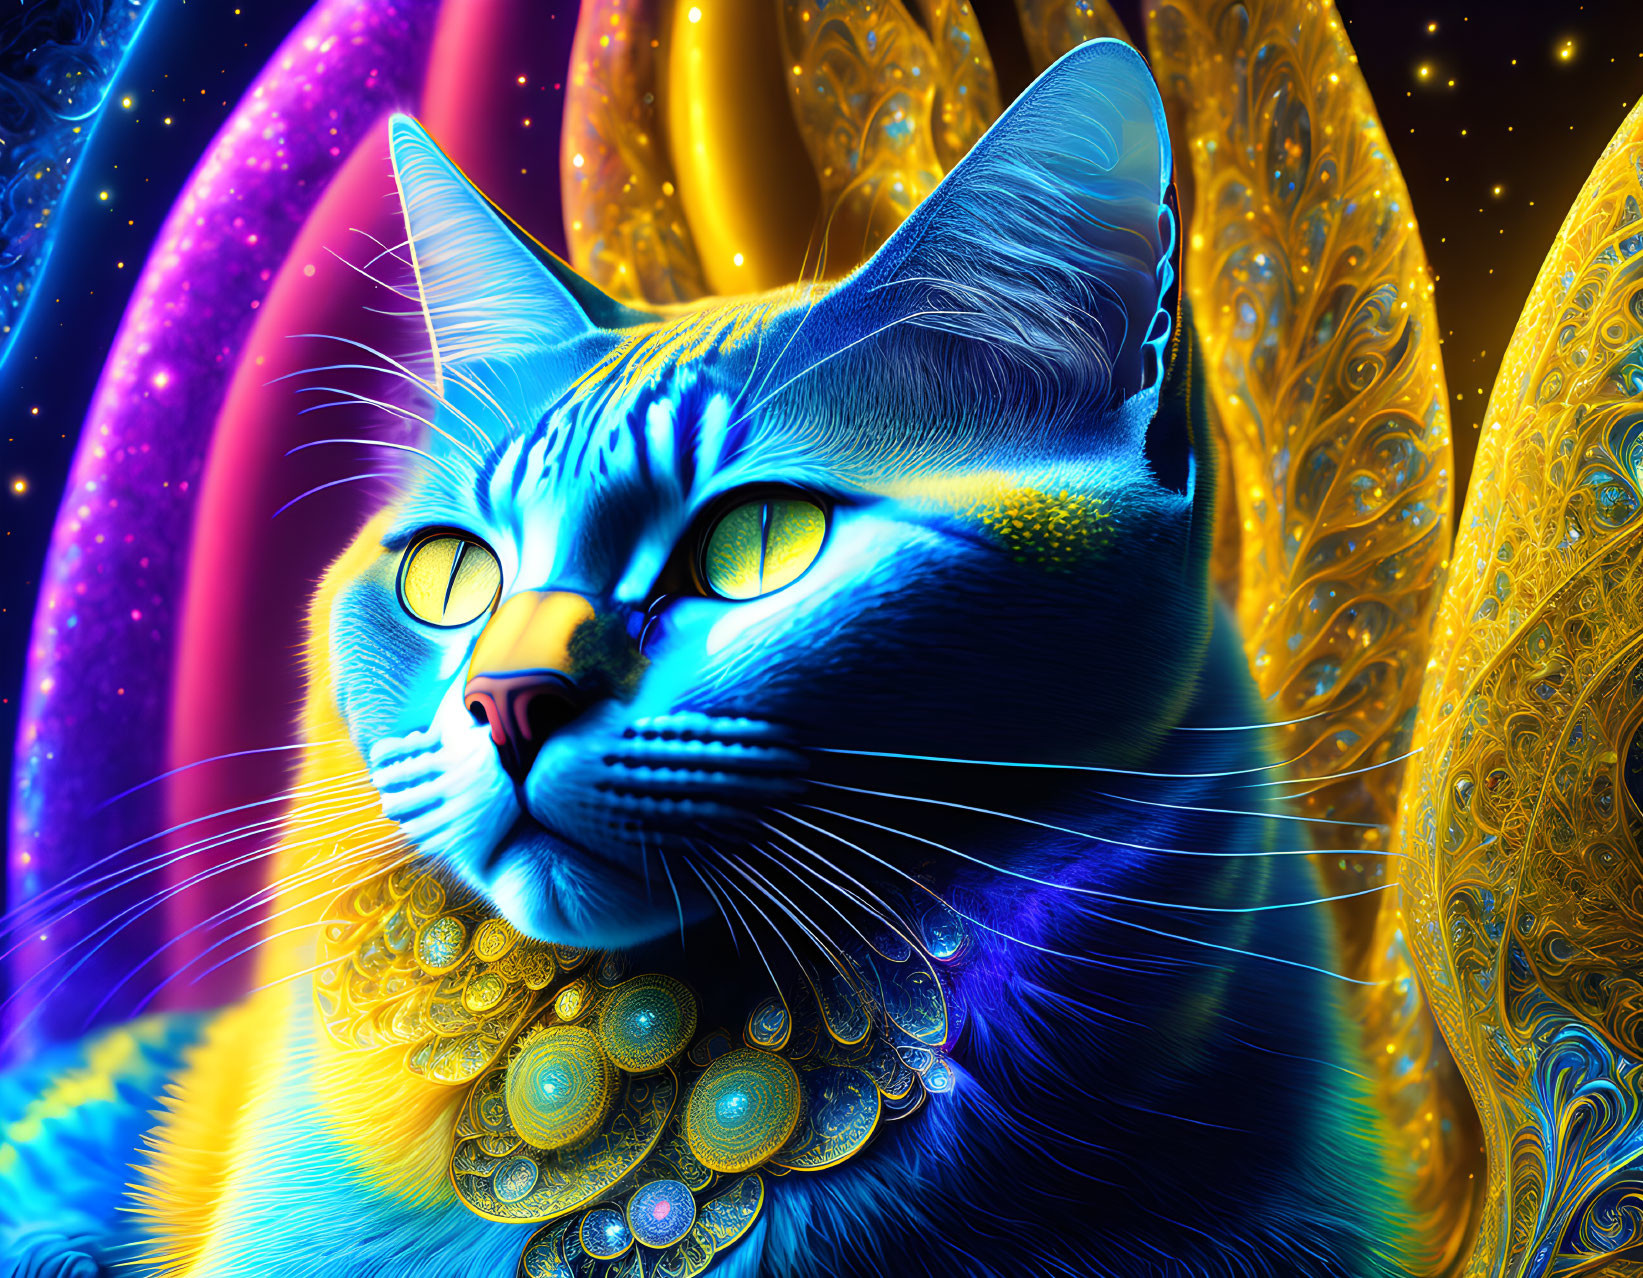 Colorful Digital Art: Blue Cat with Yellow Eyes and Golden Necklace on Psychedelic Background